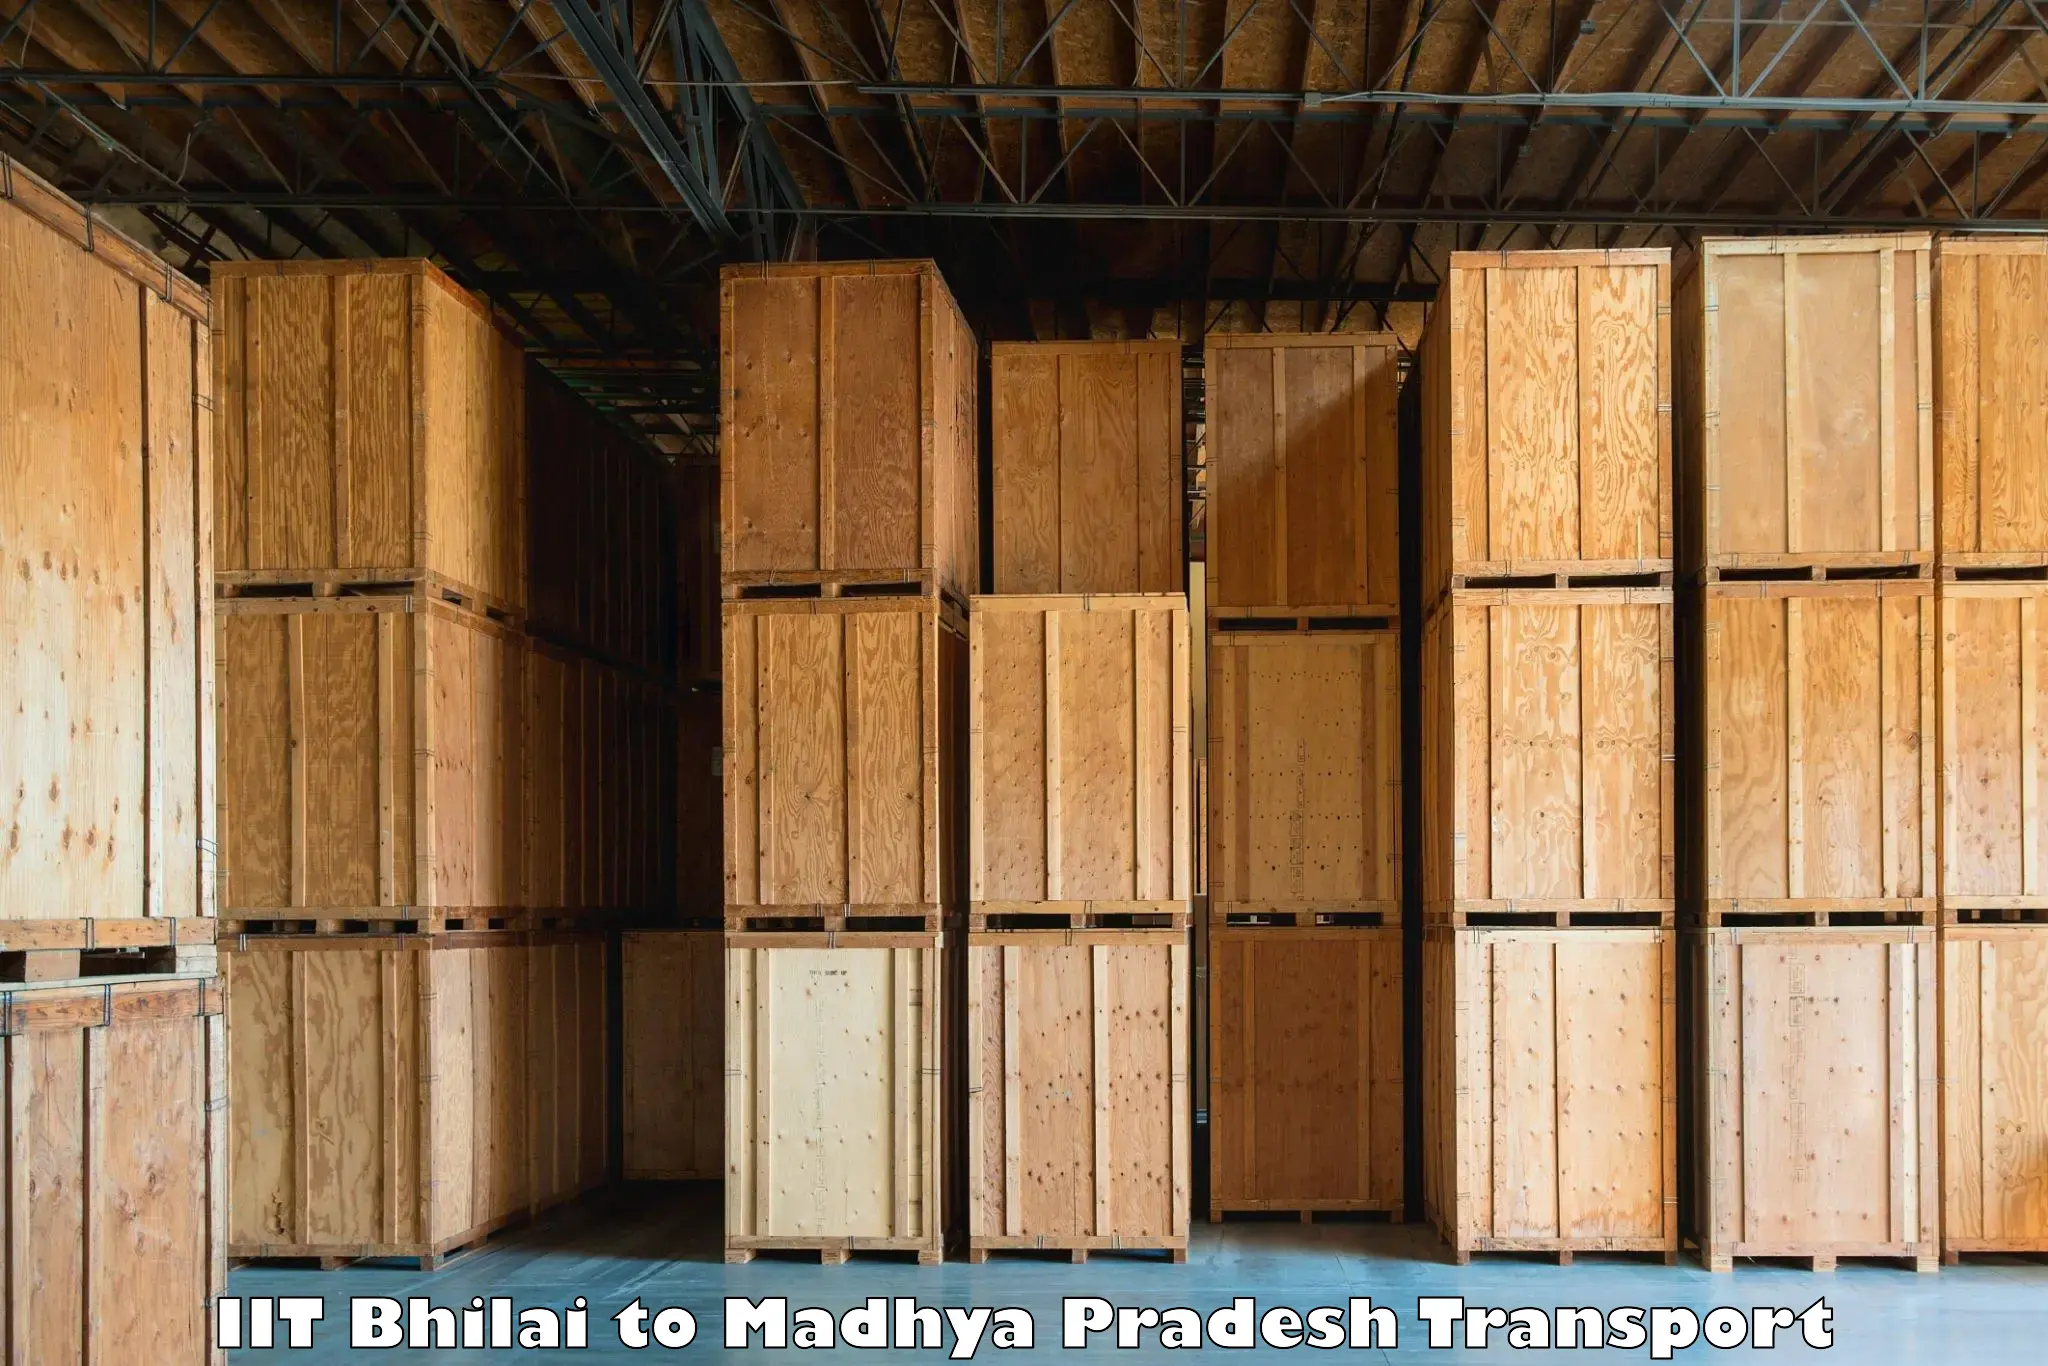 Commercial transport service IIT Bhilai to Thikri